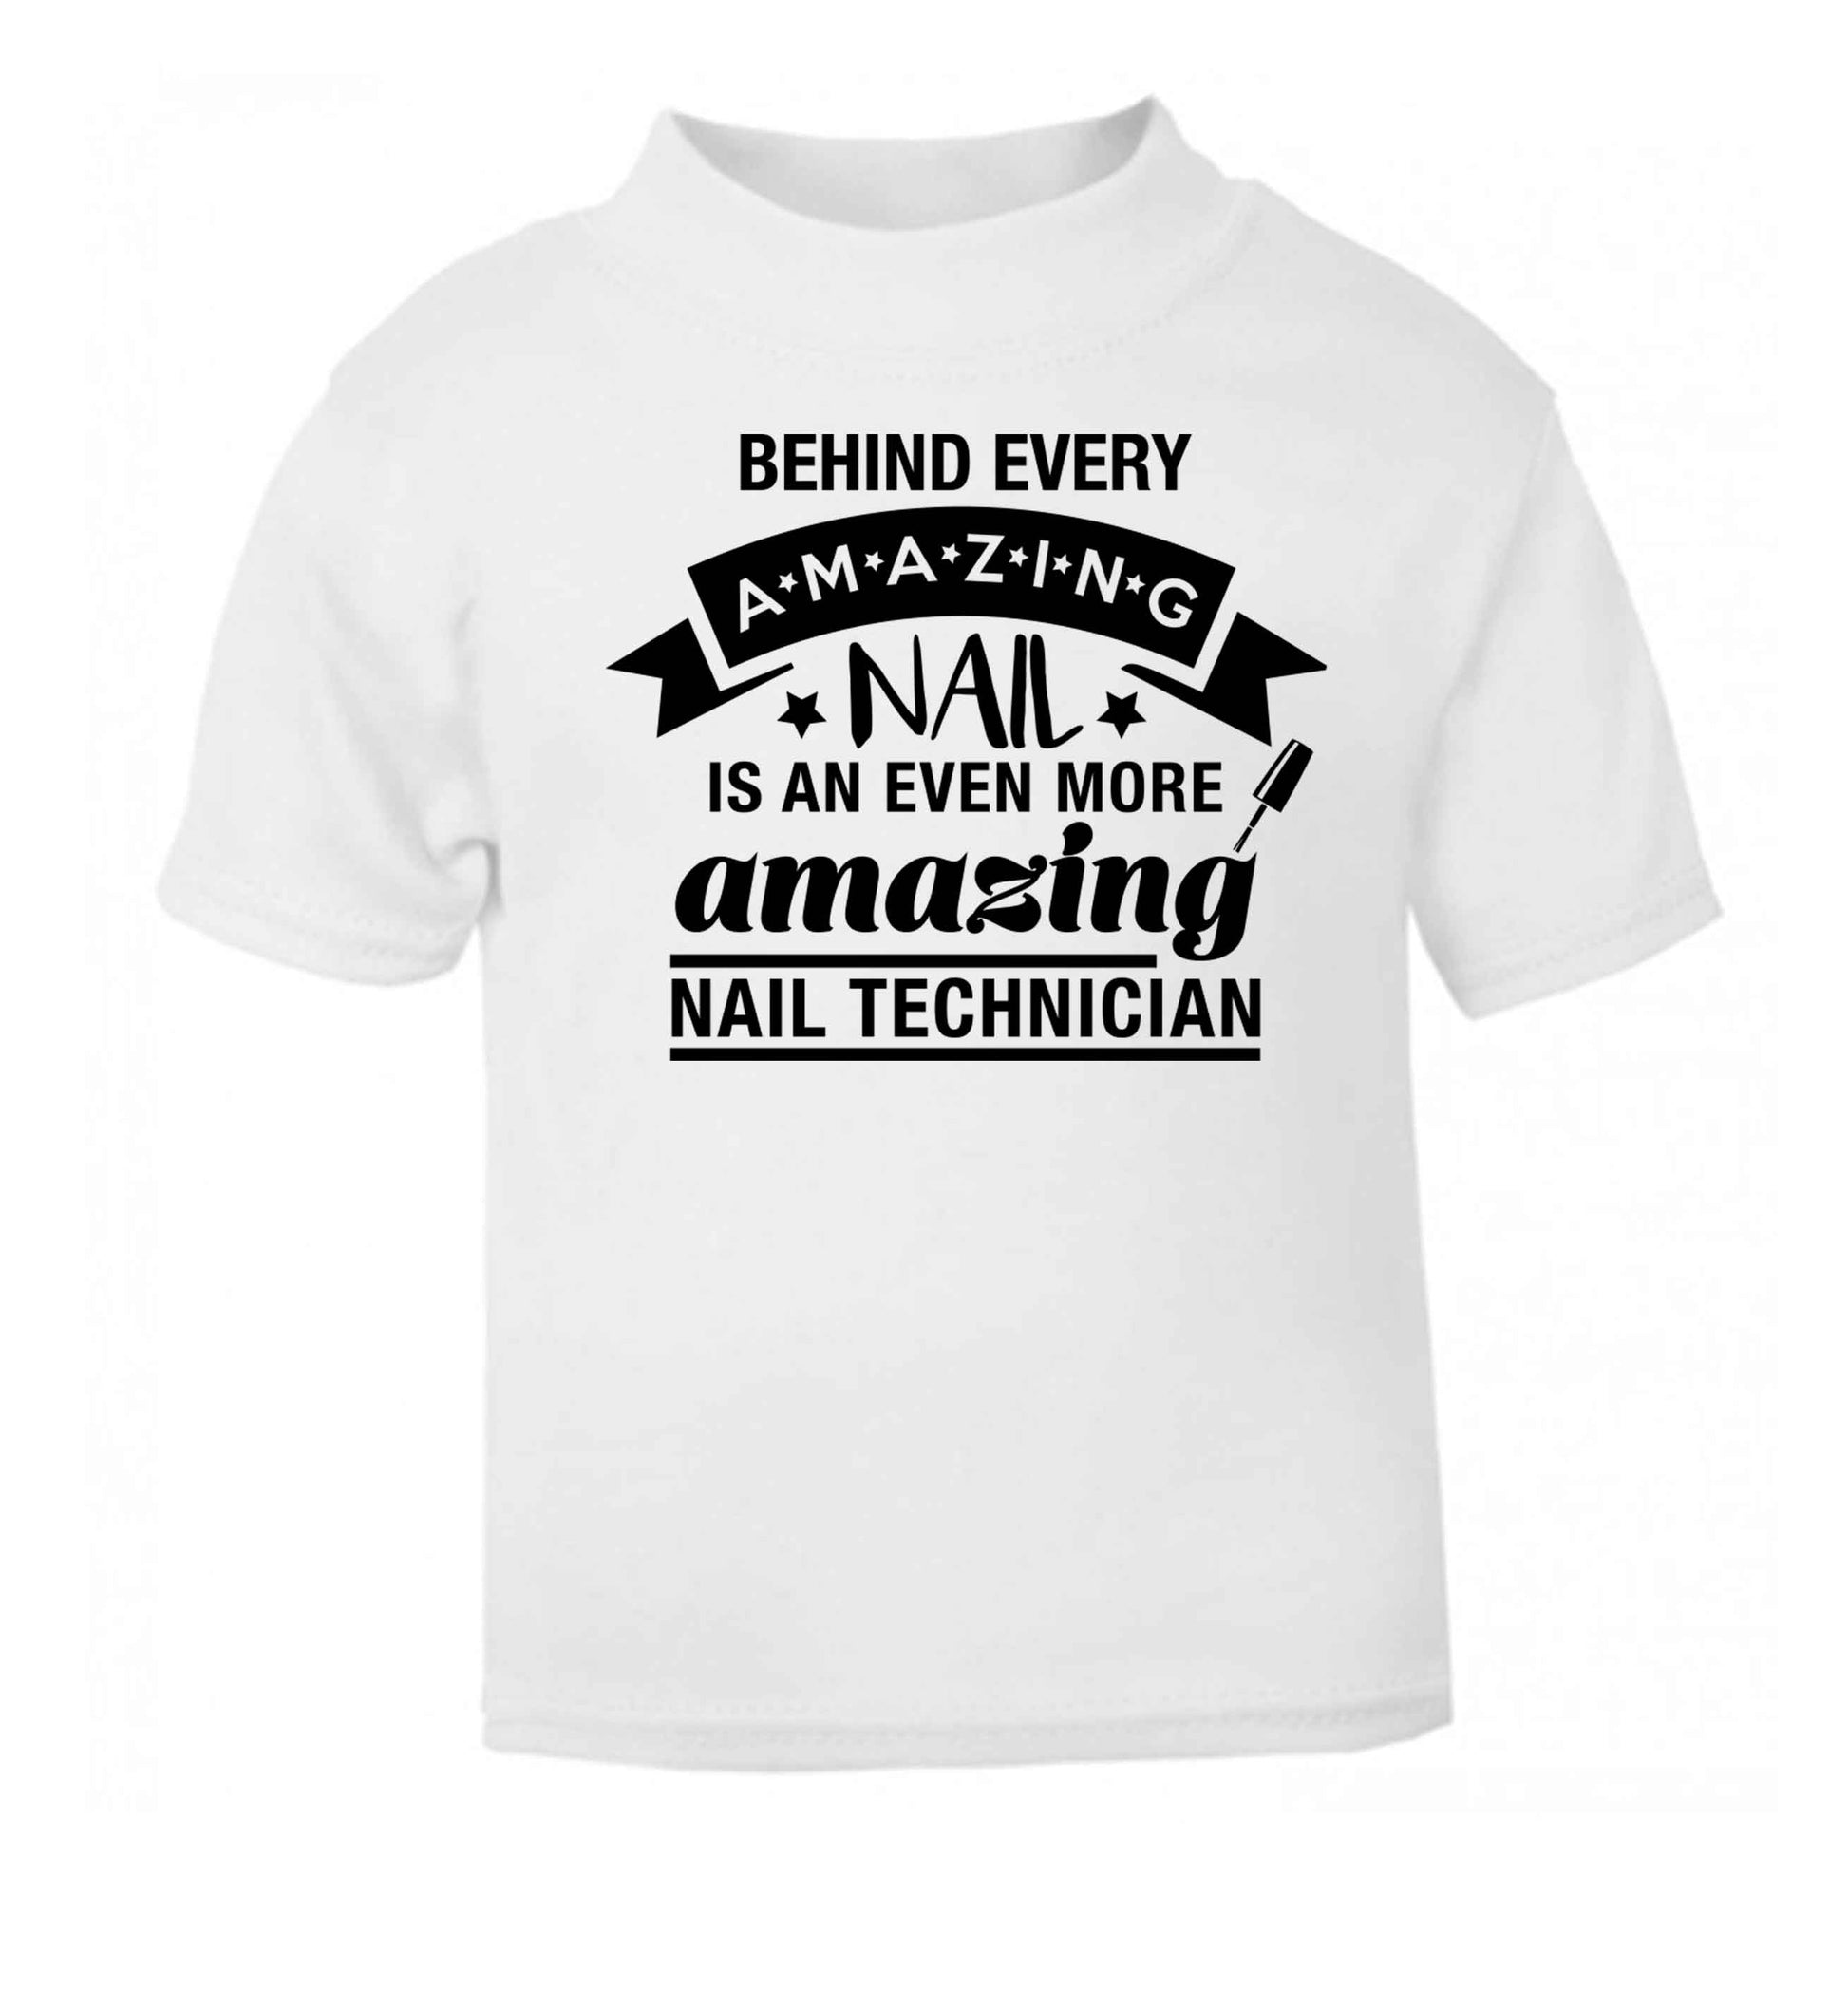 Behind every amazing nail is an even more amazing nail technician white baby toddler Tshirt 2 Years